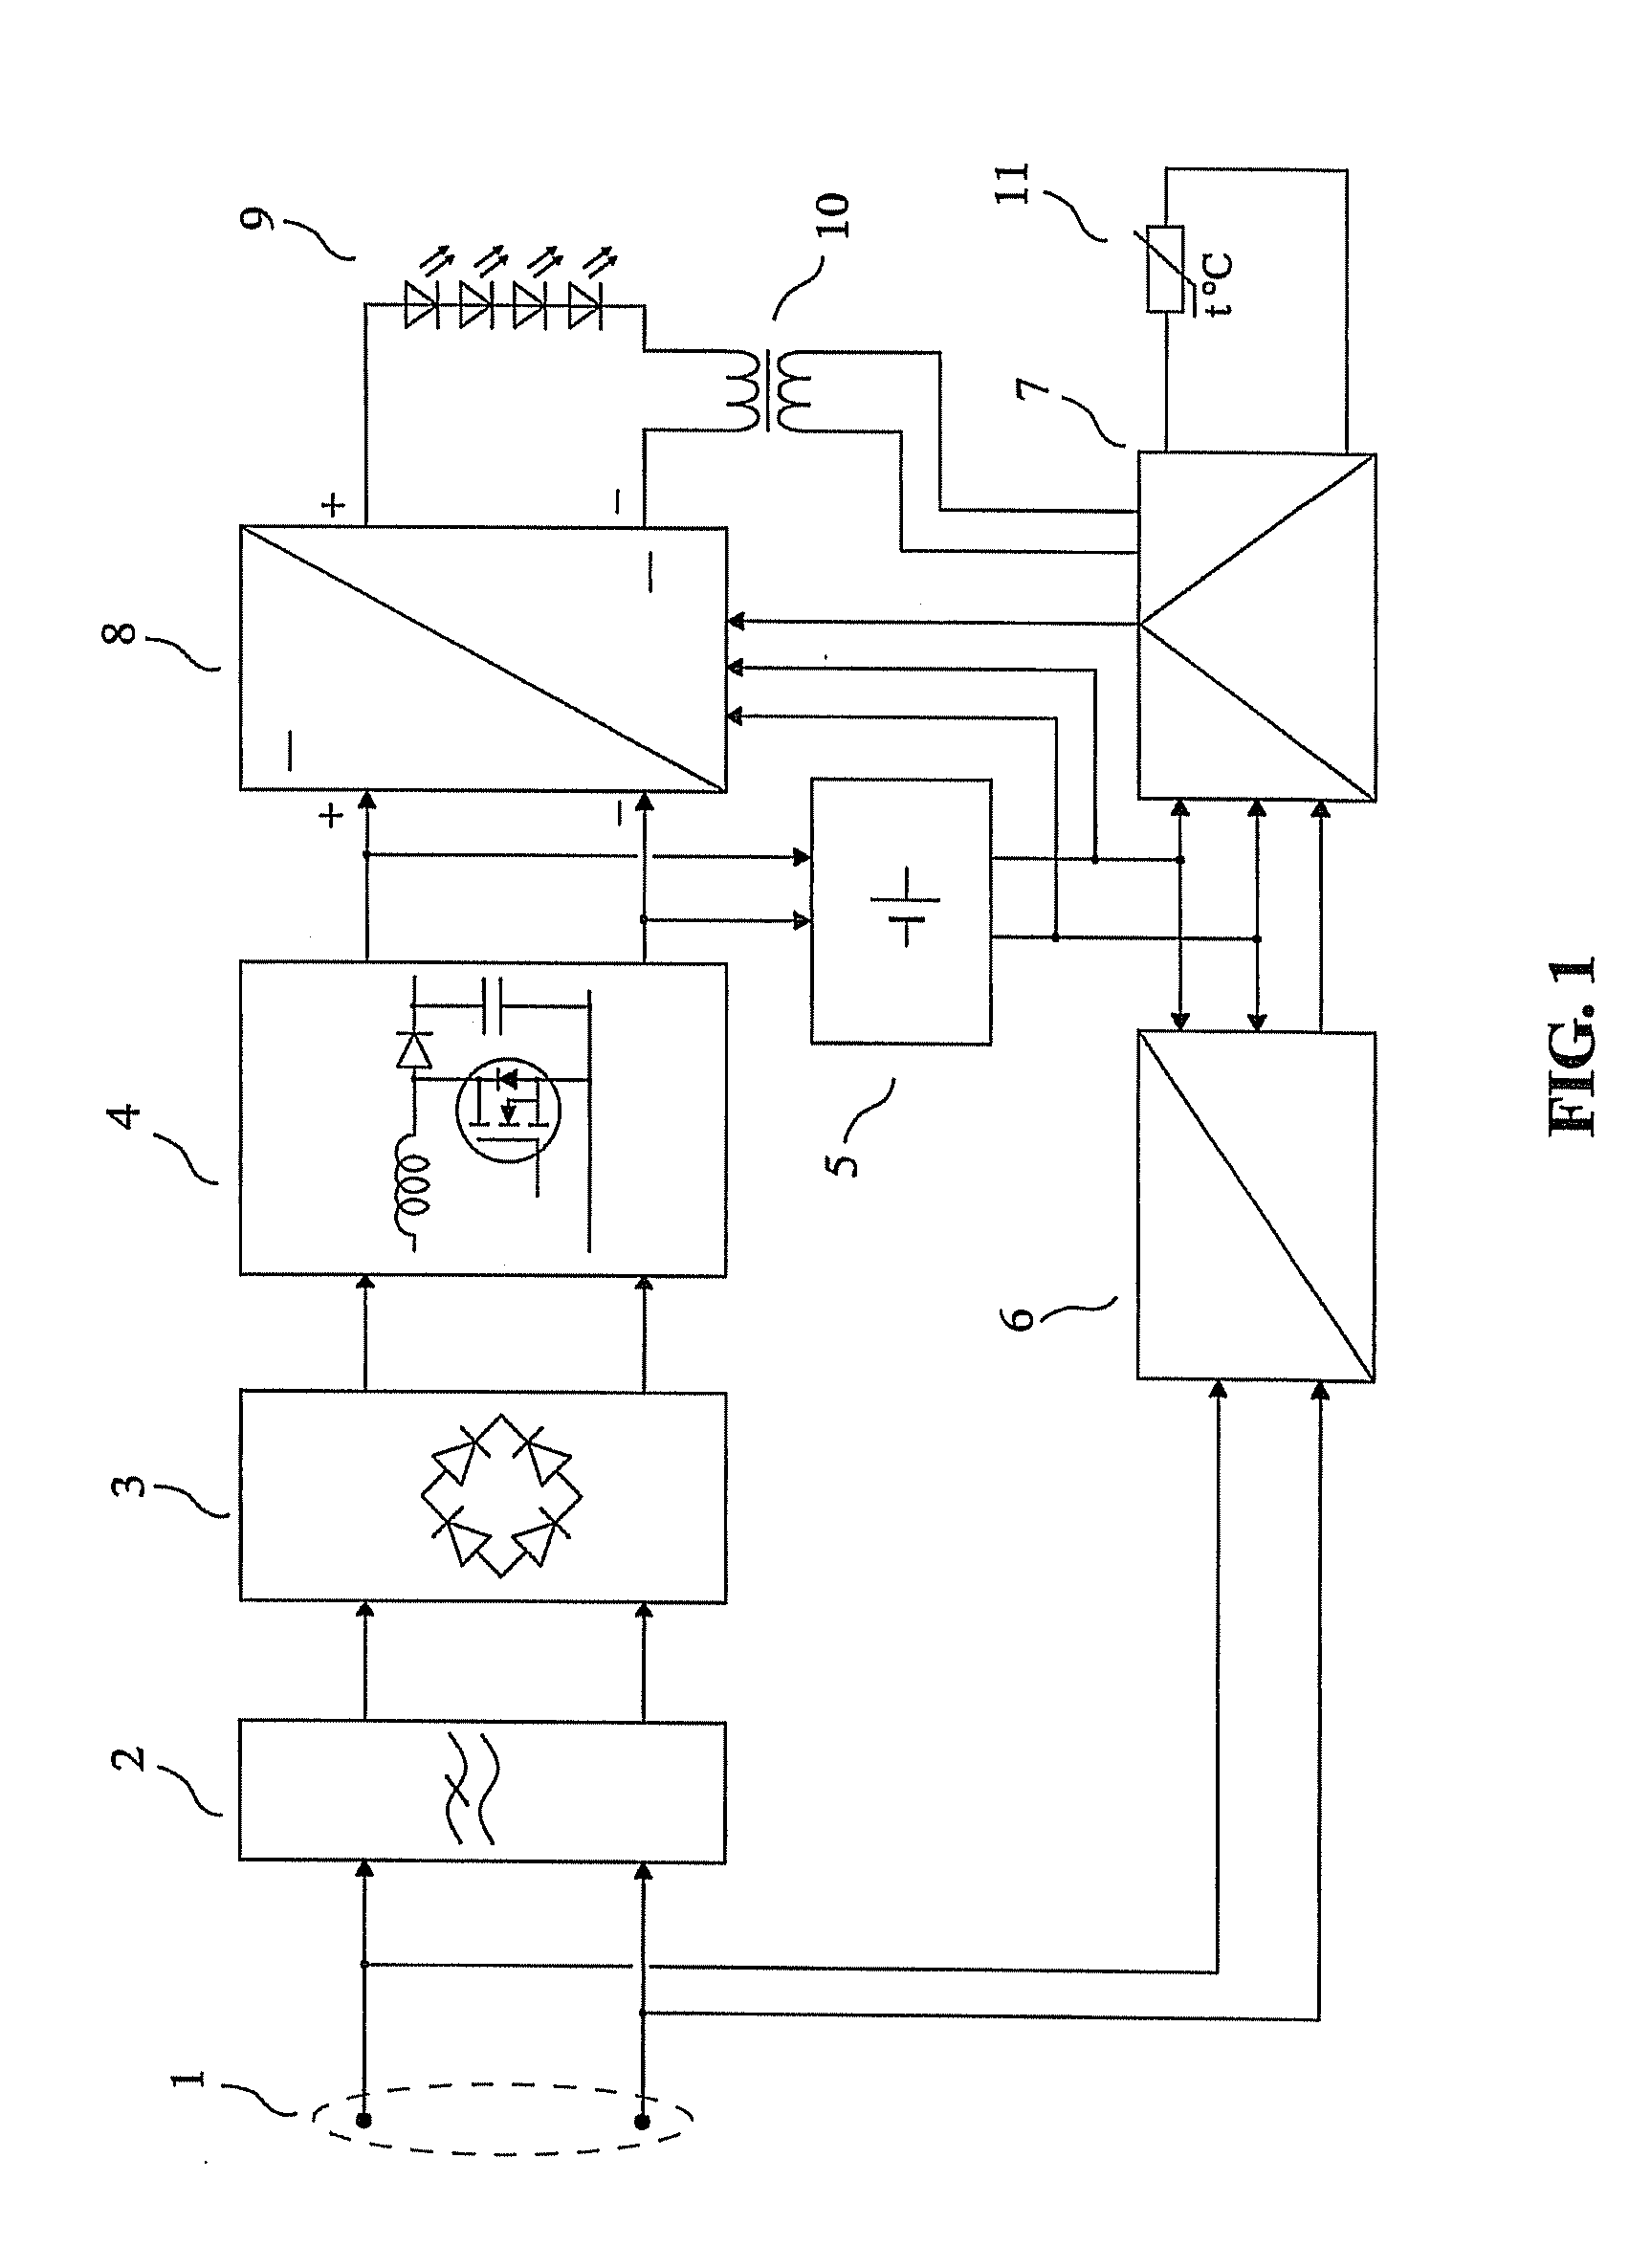 Electroluminescent Emission Device for Optical Transmission in Free Space